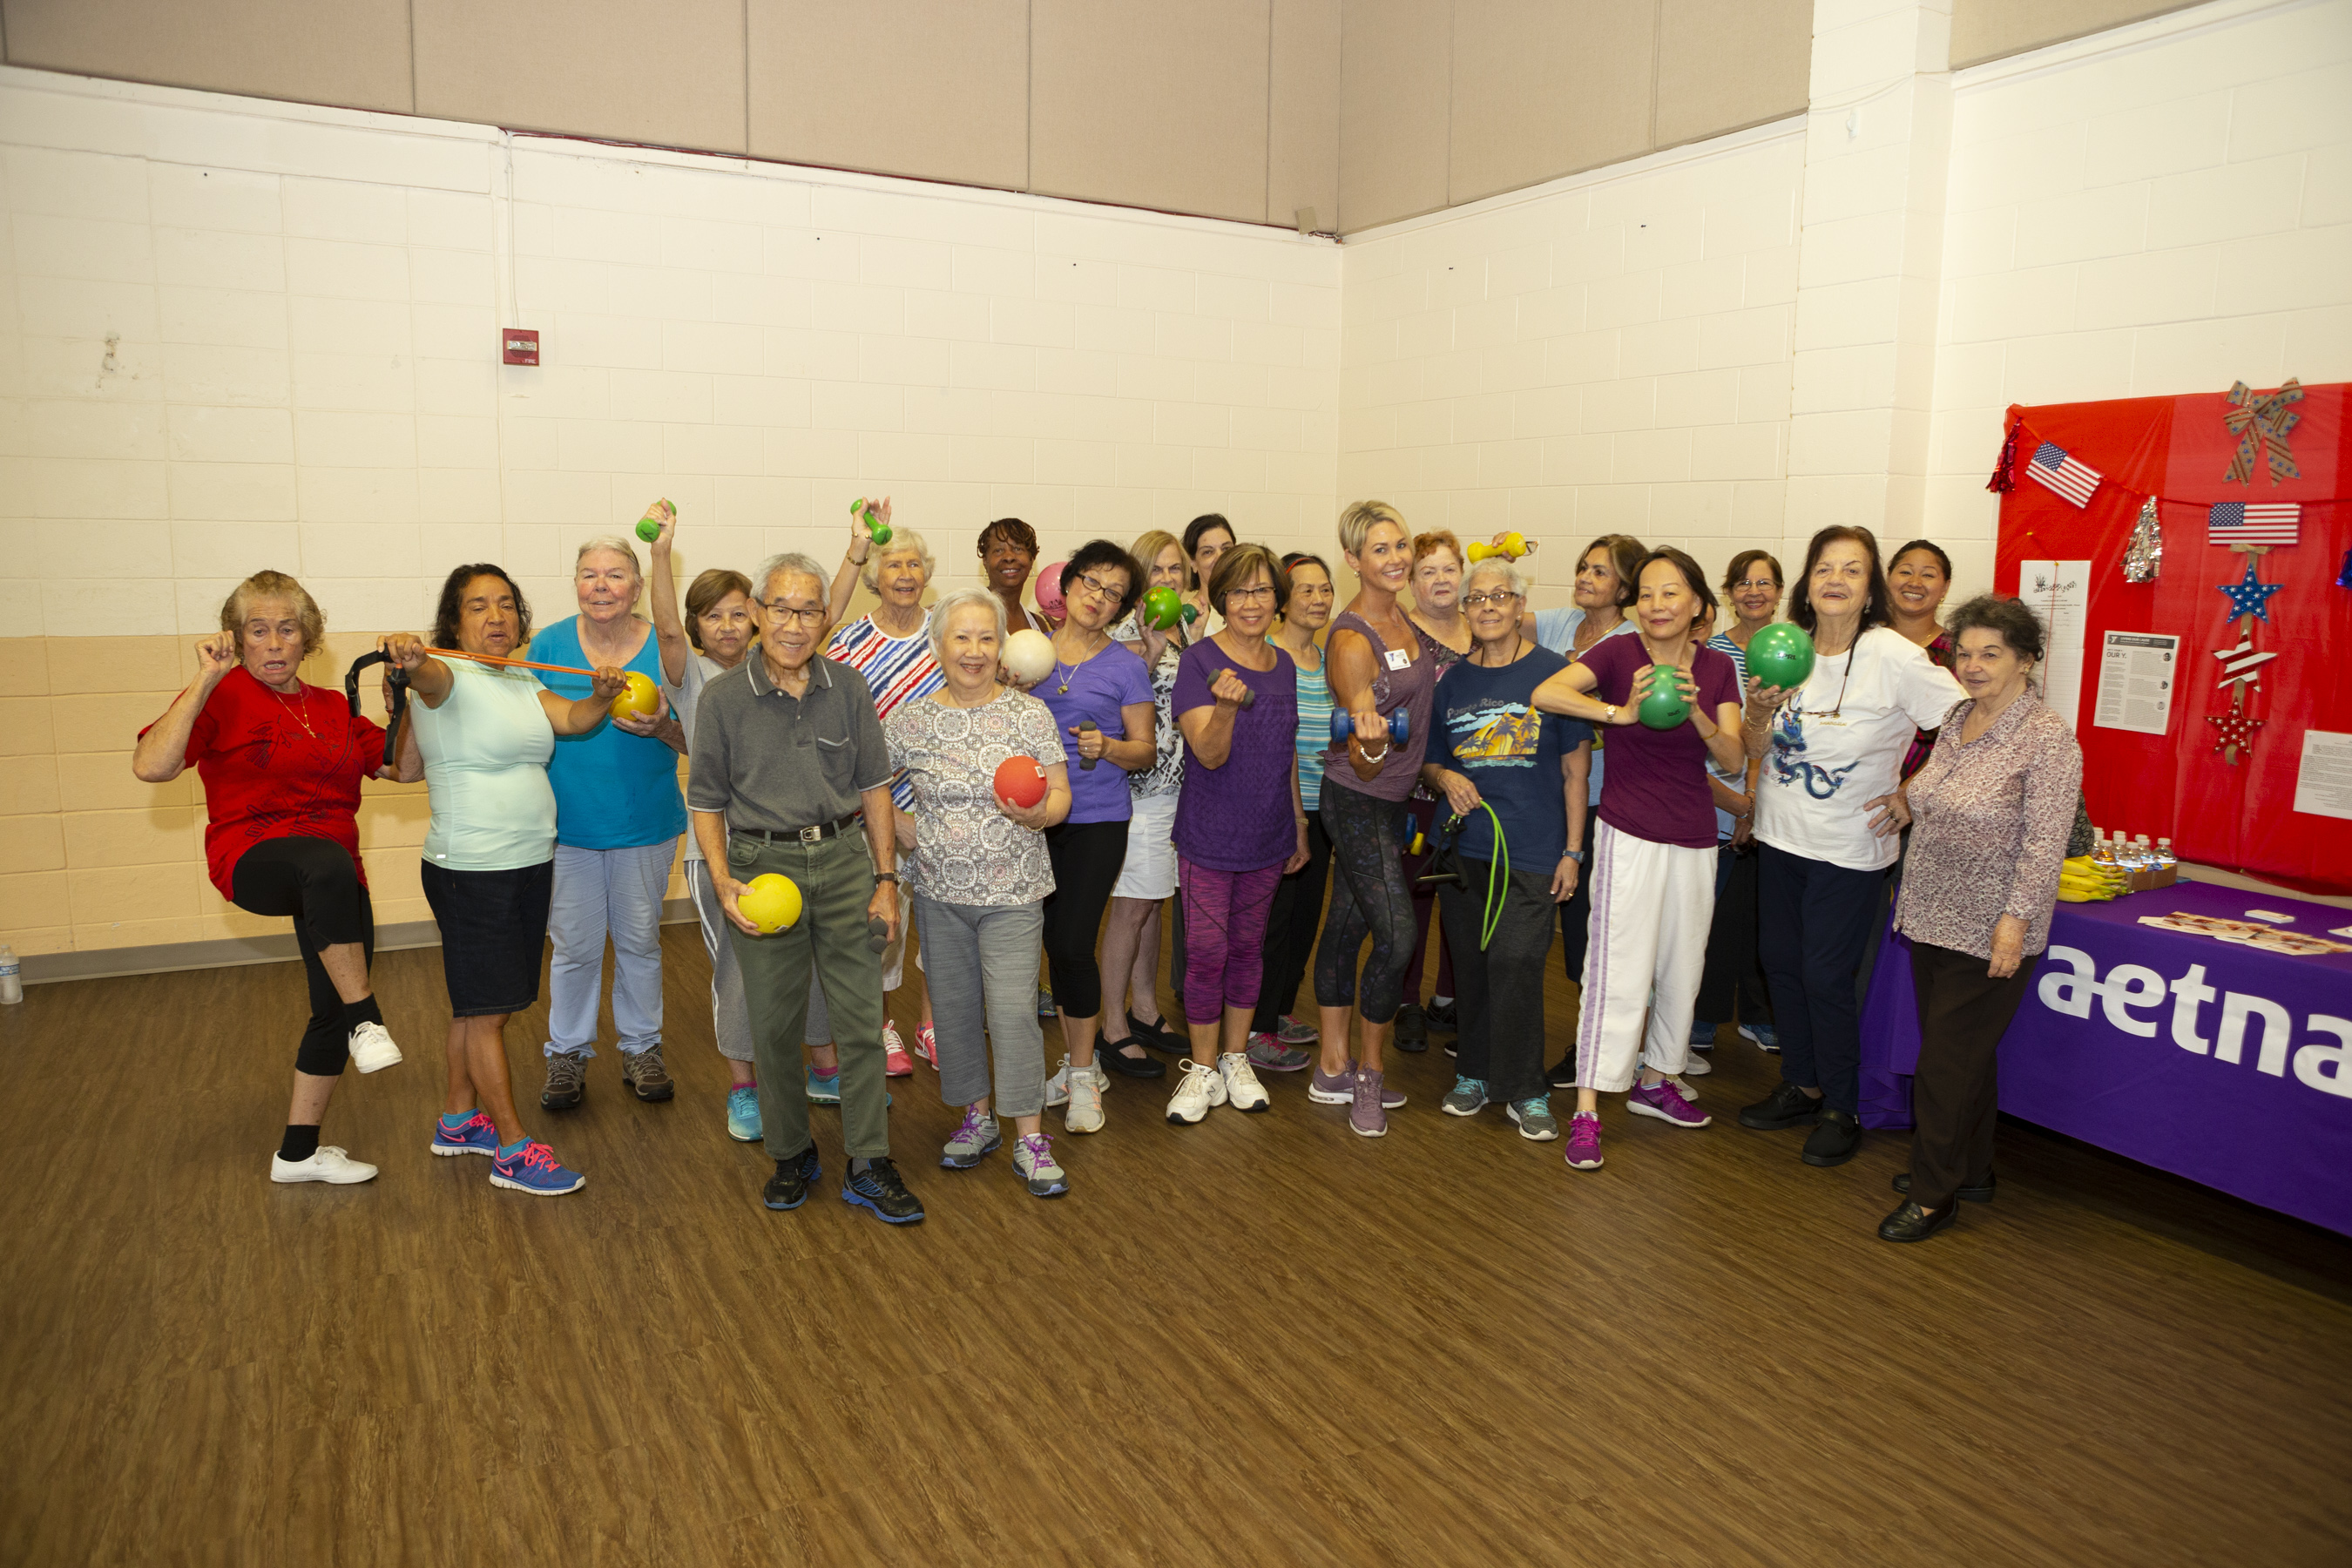 A group of senior citizens posing for a photo with their instructor as they hold exercise equipment